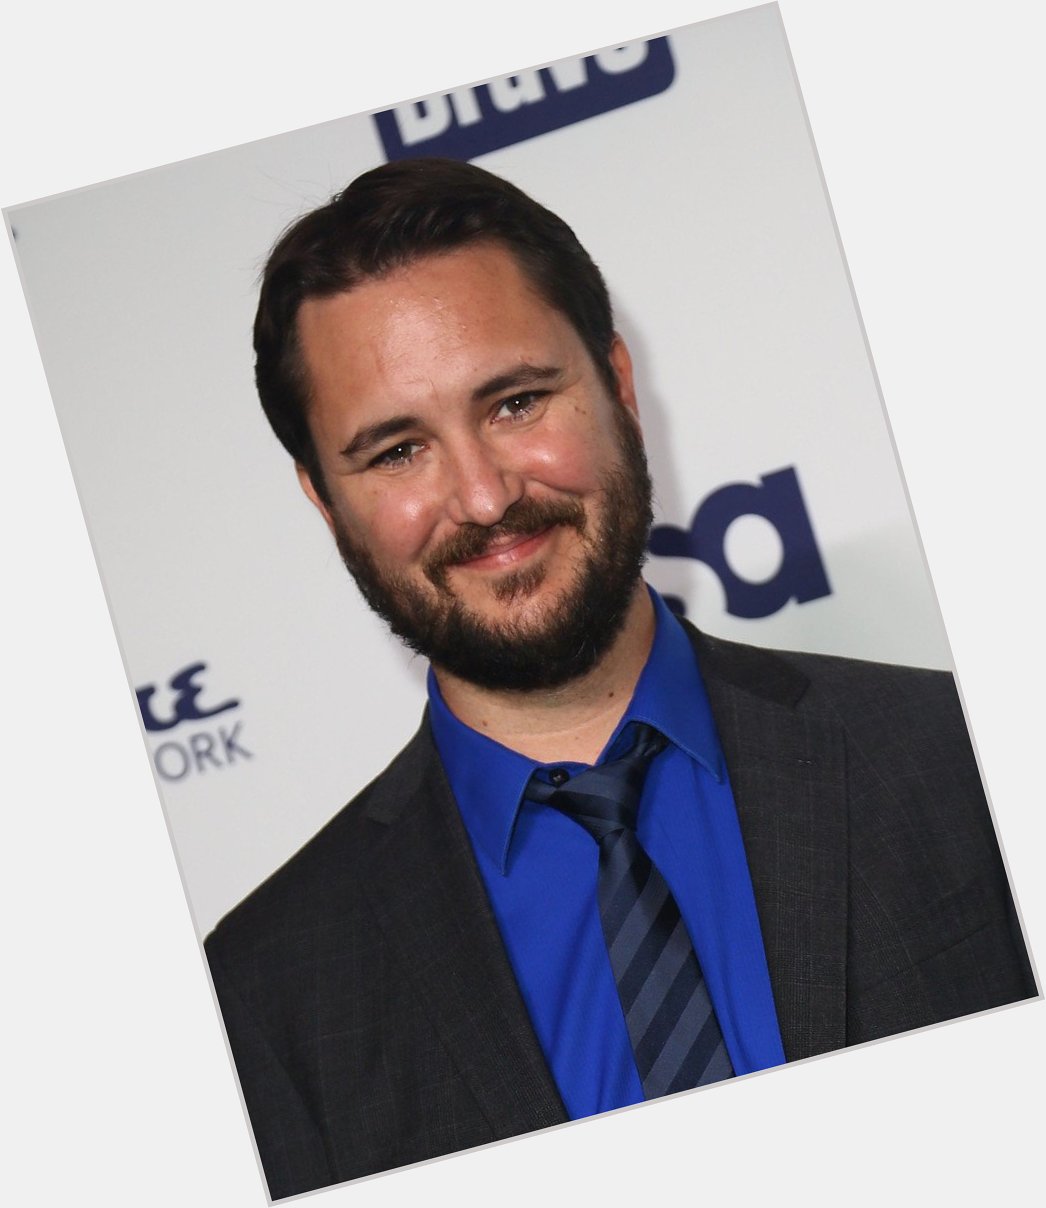 Happy 50th Birthday Wil Wheaton (Wesley Crusher from Star Trek: The Next Generation) 